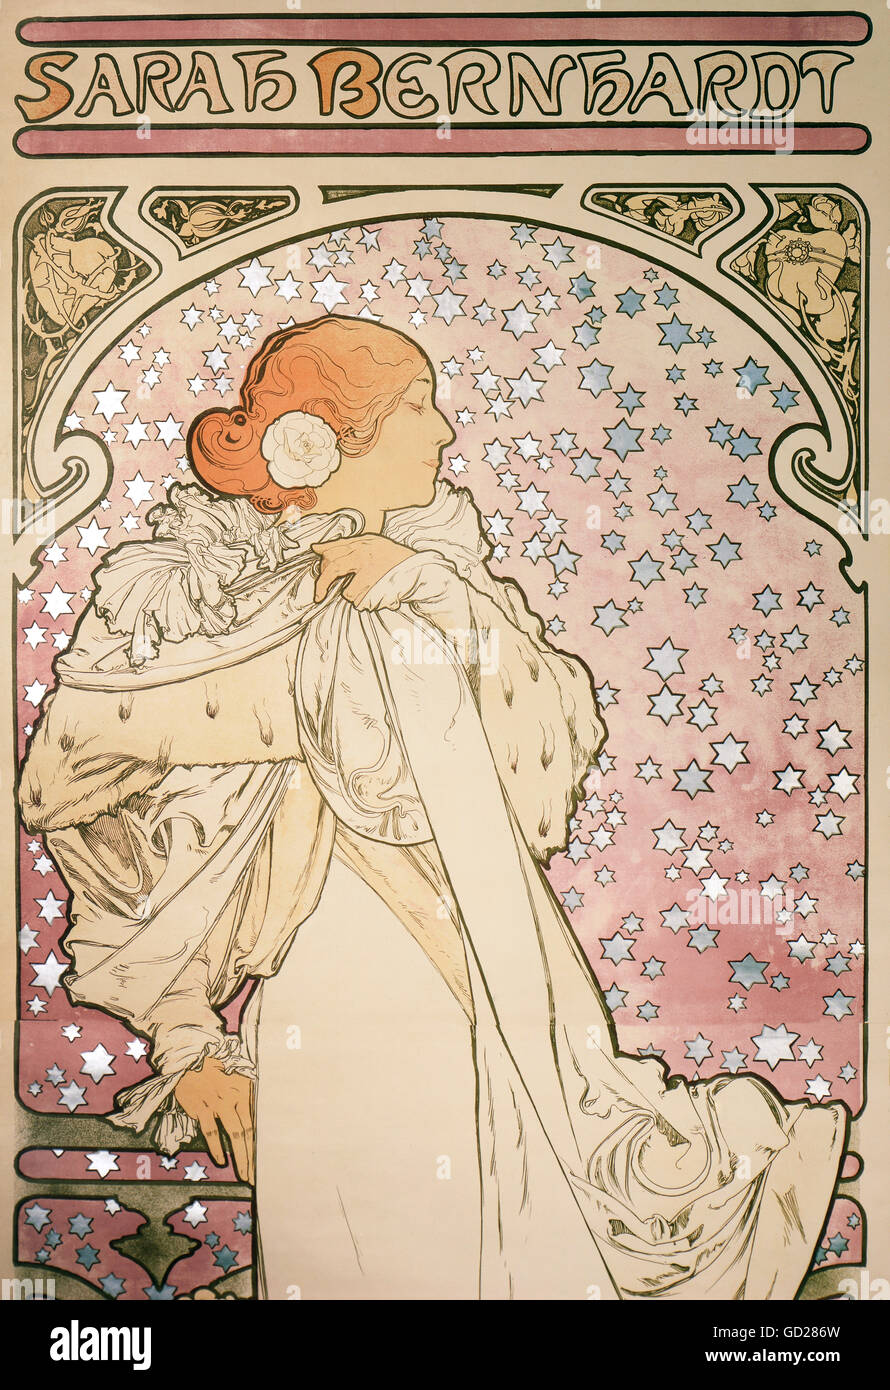 fine arts, Mucha, Alphonse (1860 - 1939), poster, detail from an advertising poster of the Theatre de la Renaissance, 'Sarah Bernhardt - La Dame aux Camelias' (The Lady of the Camellias), colour lithograph, 207 x 75.5 cm, Paris, 1896, Die Neue Sammlung (The New Collection), Munich, Artist's Copyright has not to be cleared Stock Photo